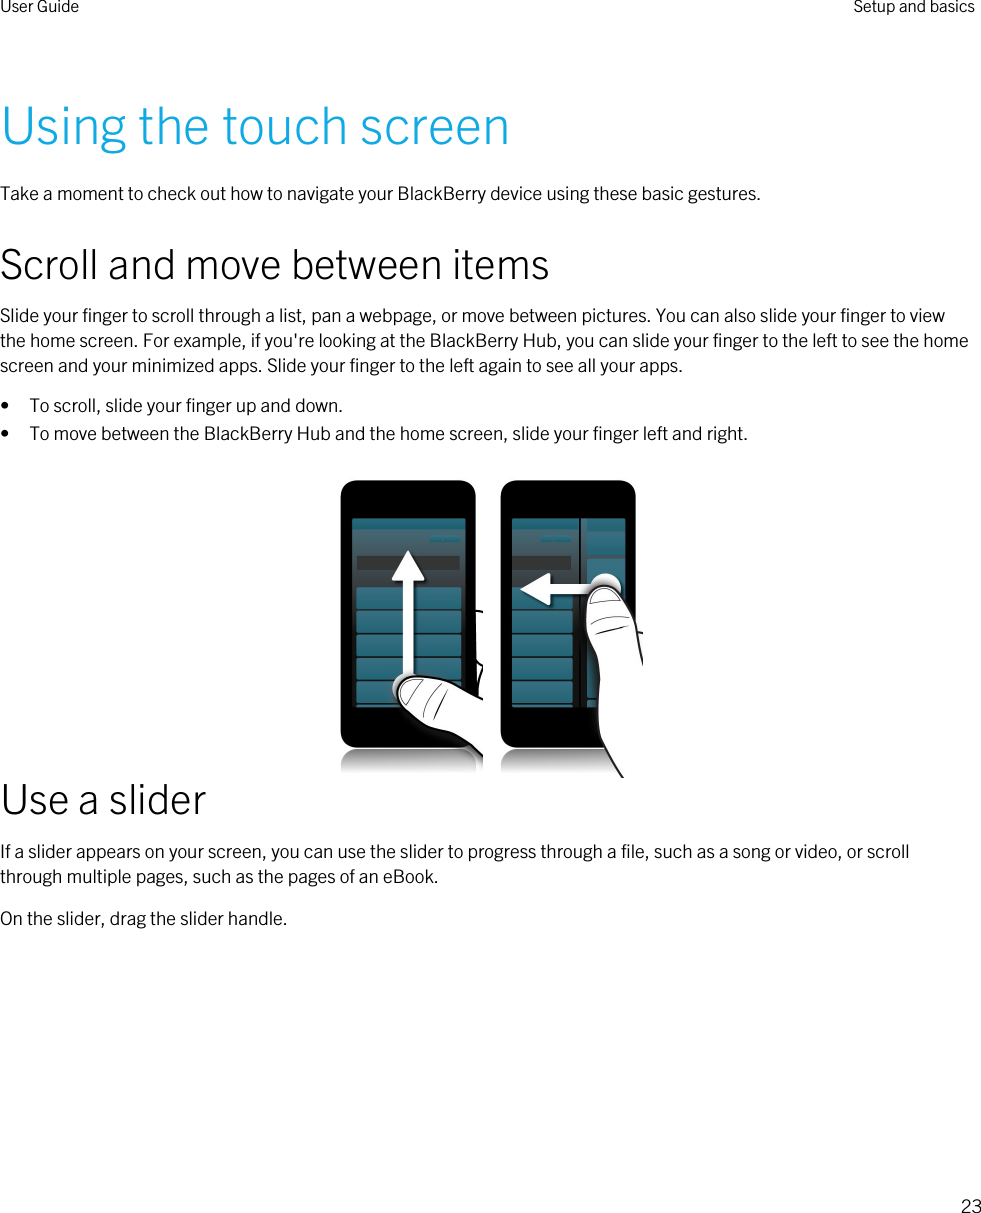 Using the touch screenTake a moment to check out how to navigate your BlackBerry device using these basic gestures.Scroll and move between itemsSlide your finger to scroll through a list, pan a webpage, or move between pictures. You can also slide your finger to view the home screen. For example, if you&apos;re looking at the BlackBerry Hub, you can slide your finger to the left to see the home screen and your minimized apps. Slide your finger to the left again to see all your apps.• To scroll, slide your finger up and down.• To move between the BlackBerry Hub and the home screen, slide your finger left and right.Use a sliderIf a slider appears on your screen, you can use the slider to progress through a file, such as a song or video, or scroll through multiple pages, such as the pages of an eBook.On the slider, drag the slider handle. User Guide Setup and basics23